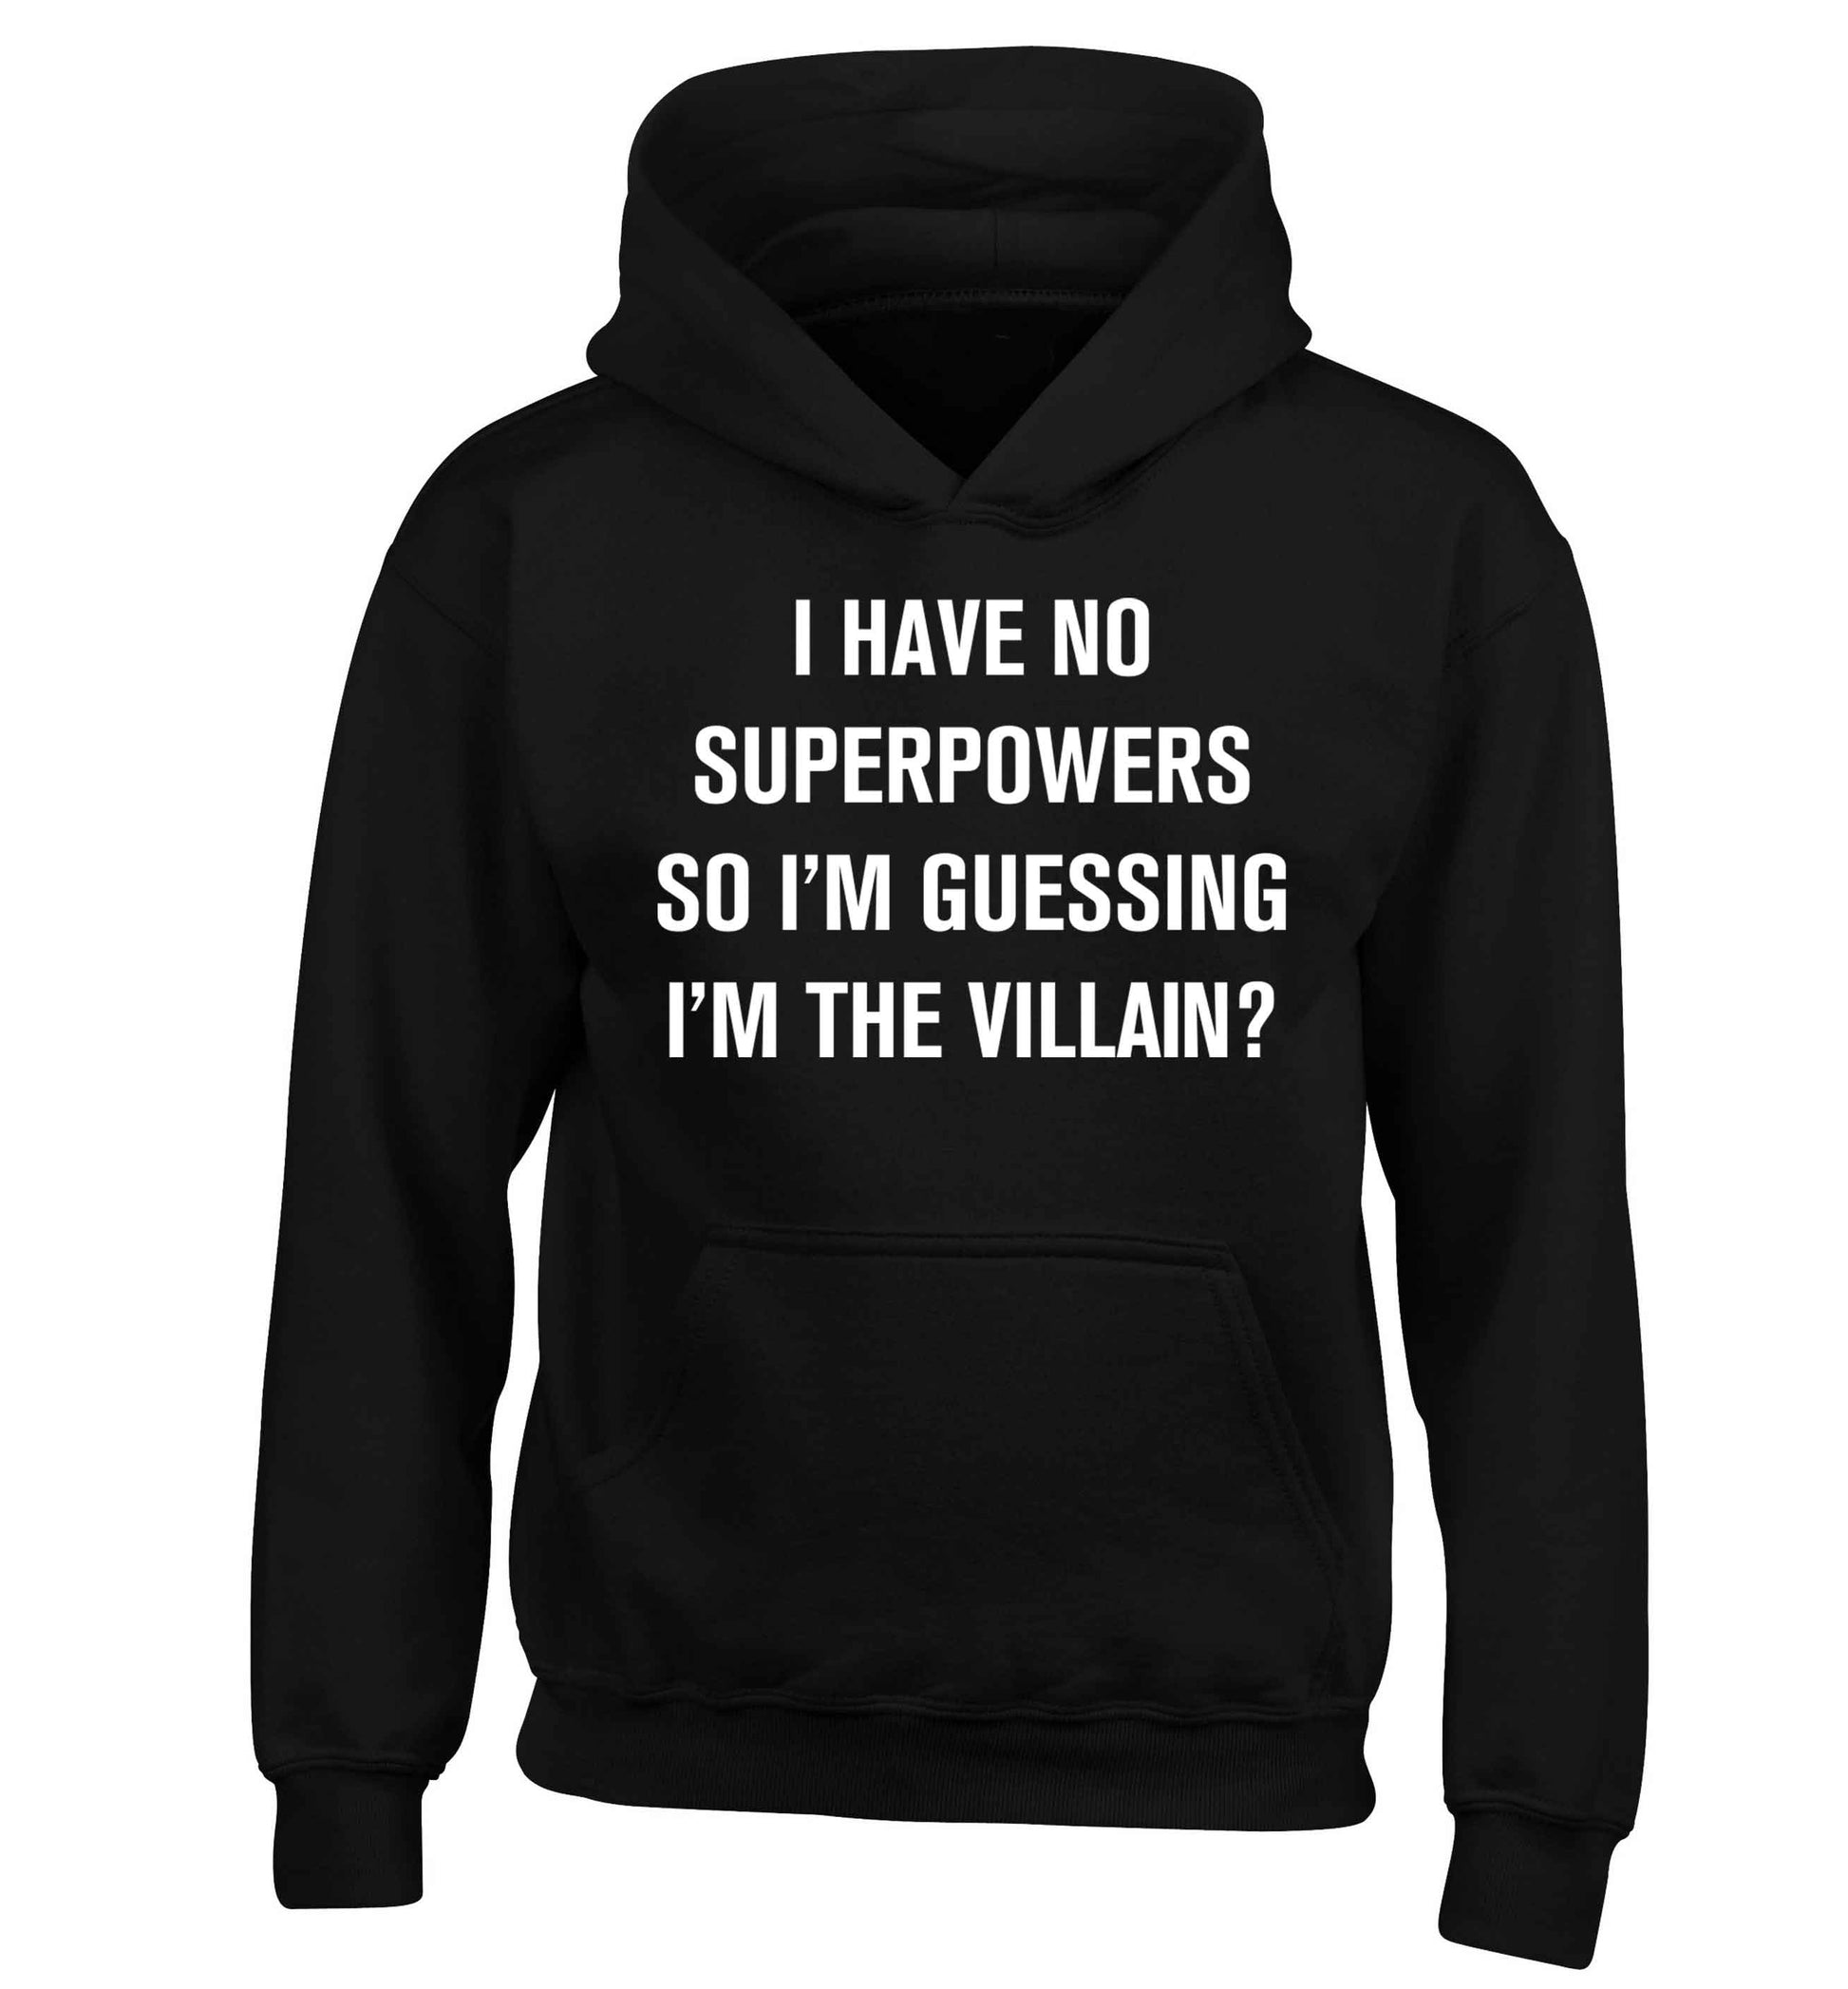 I have no superpowers so I'm guessing I'm the villain? children's black hoodie 12-13 Years